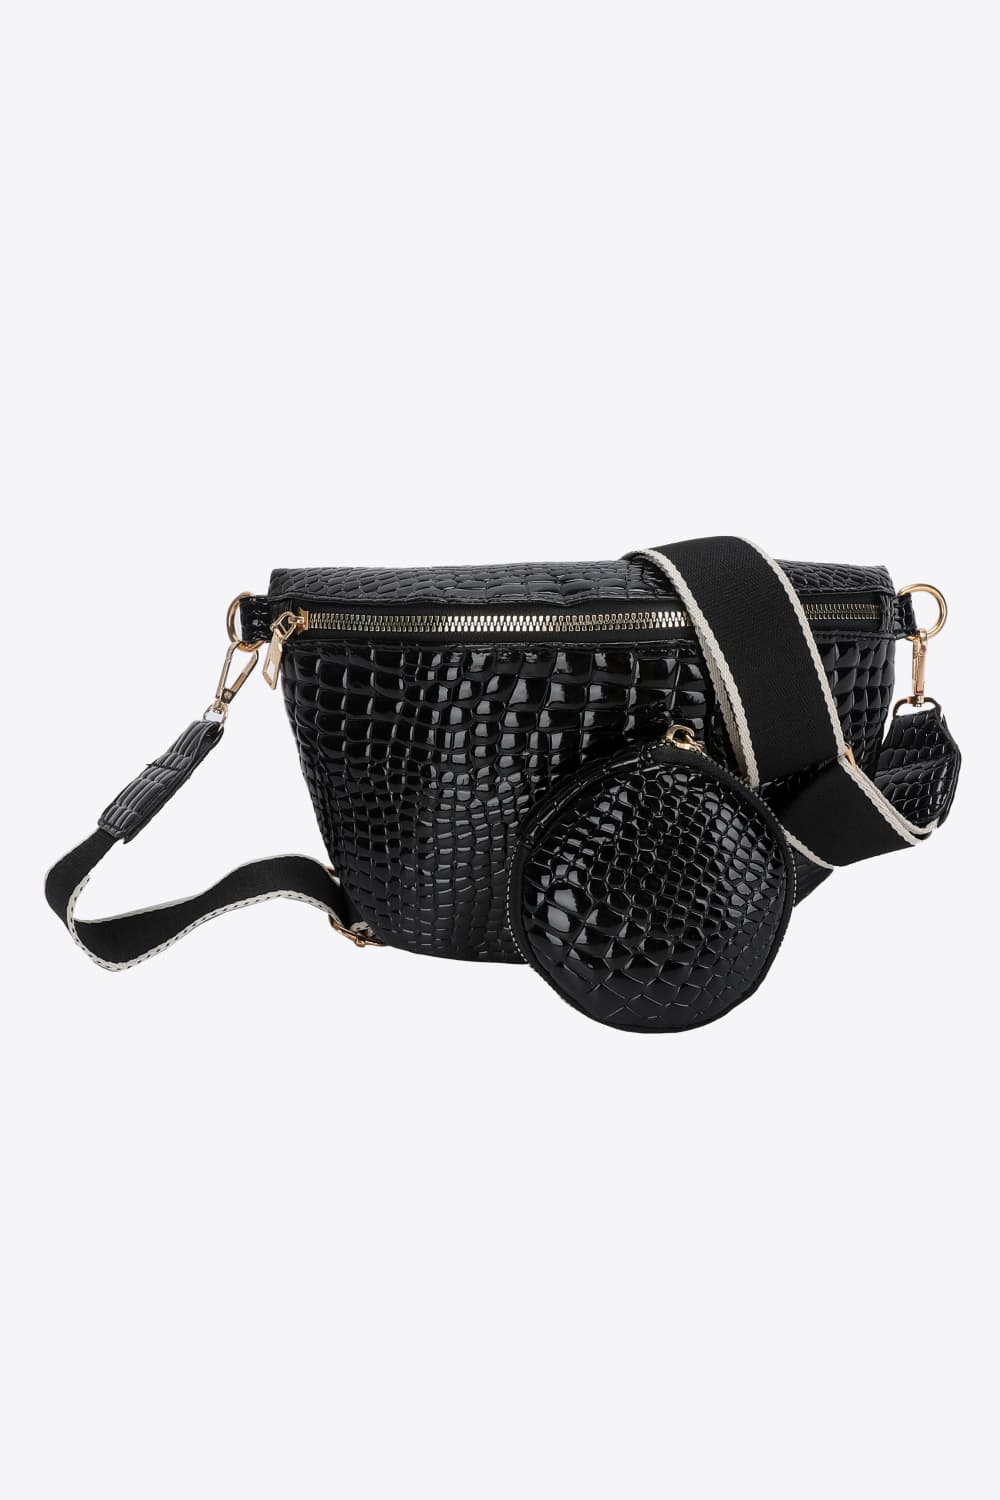 PU Leather Sling Bag with Small Purse | Sugarz Chique Boutique